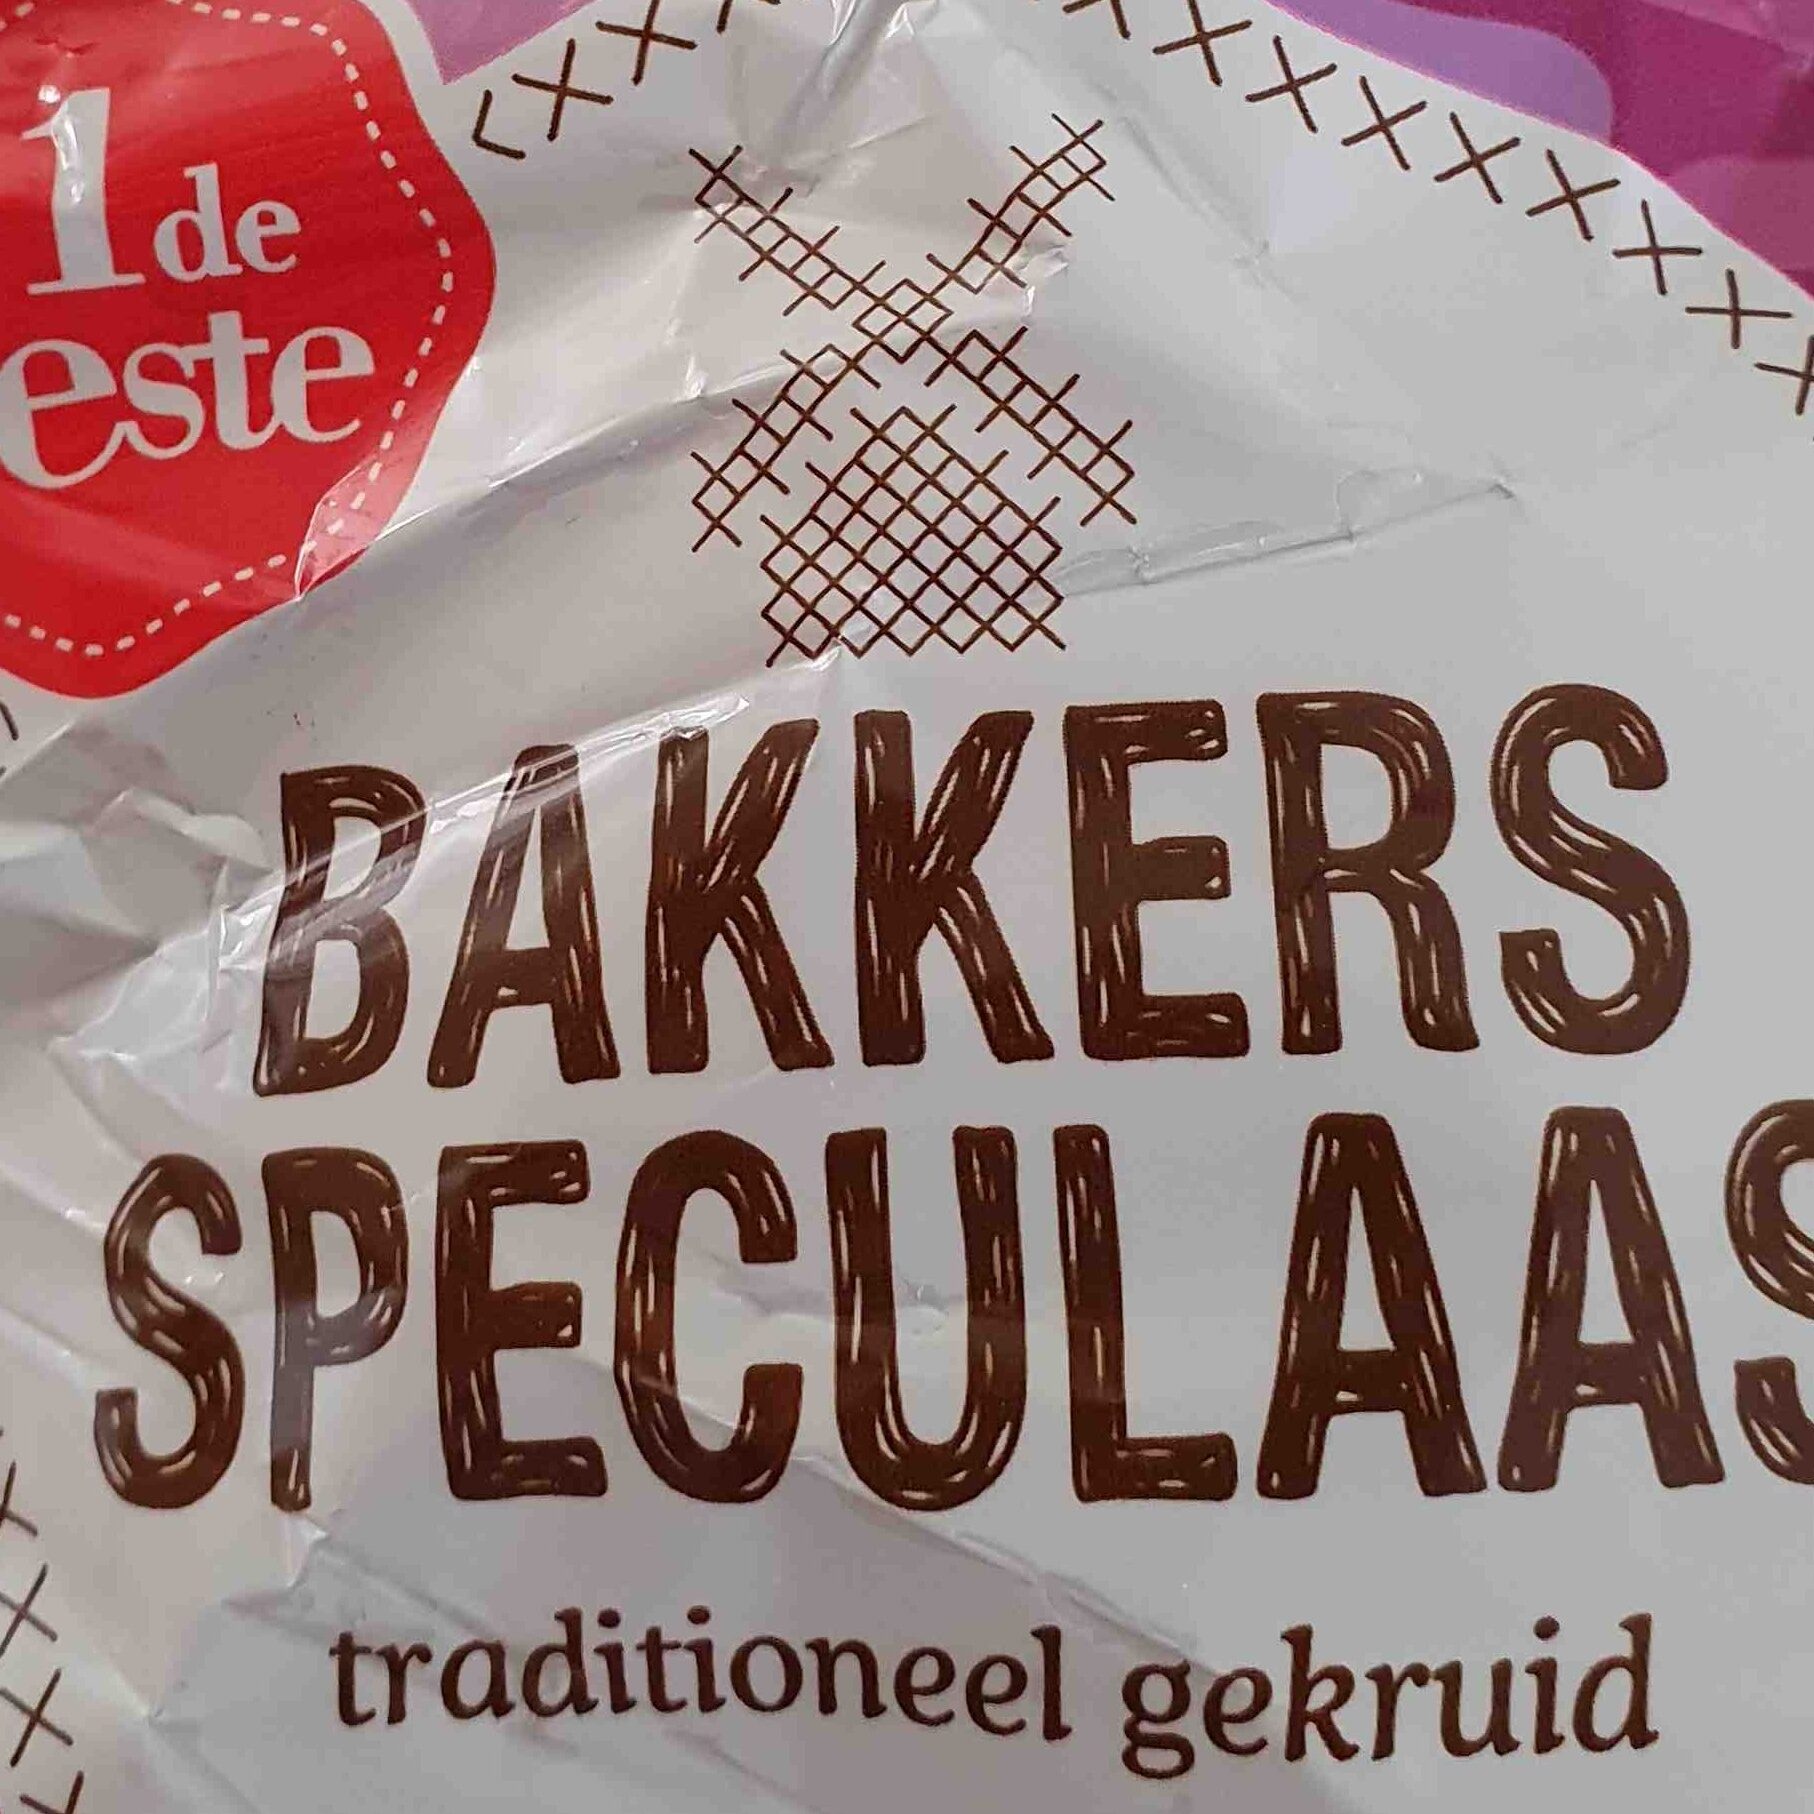 Bakkers speculaas - Product